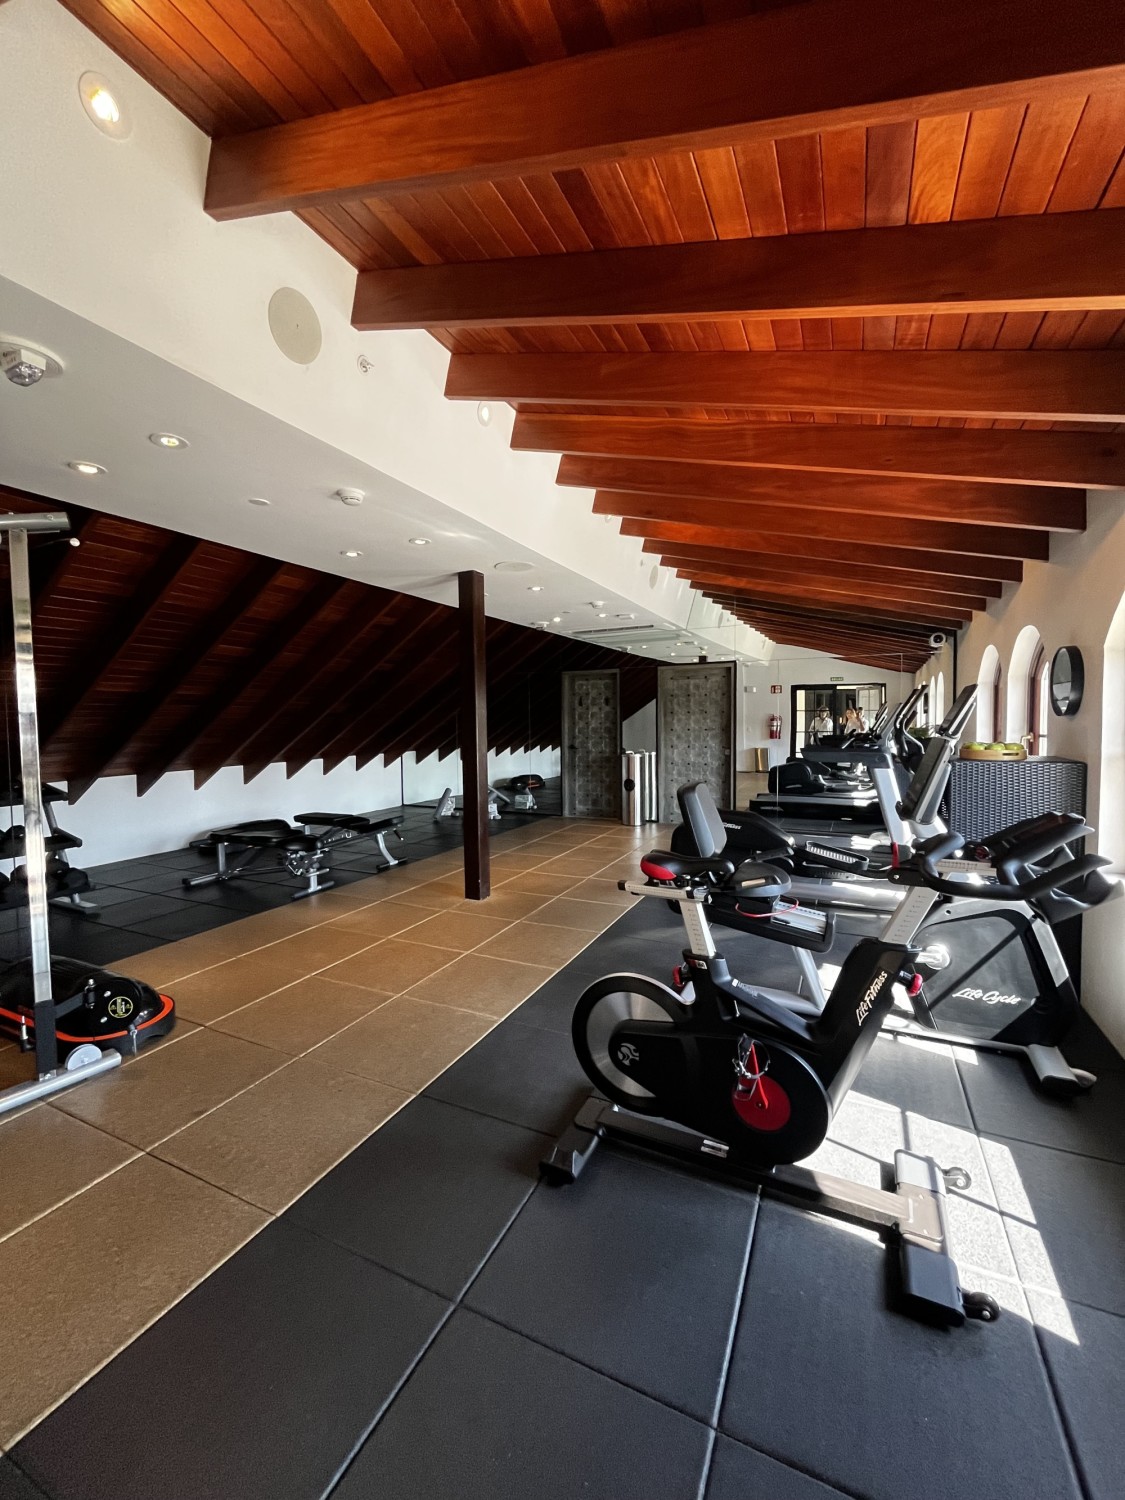 A workout facility with a wood paneled ceiling, black mat flooring and white walls. 